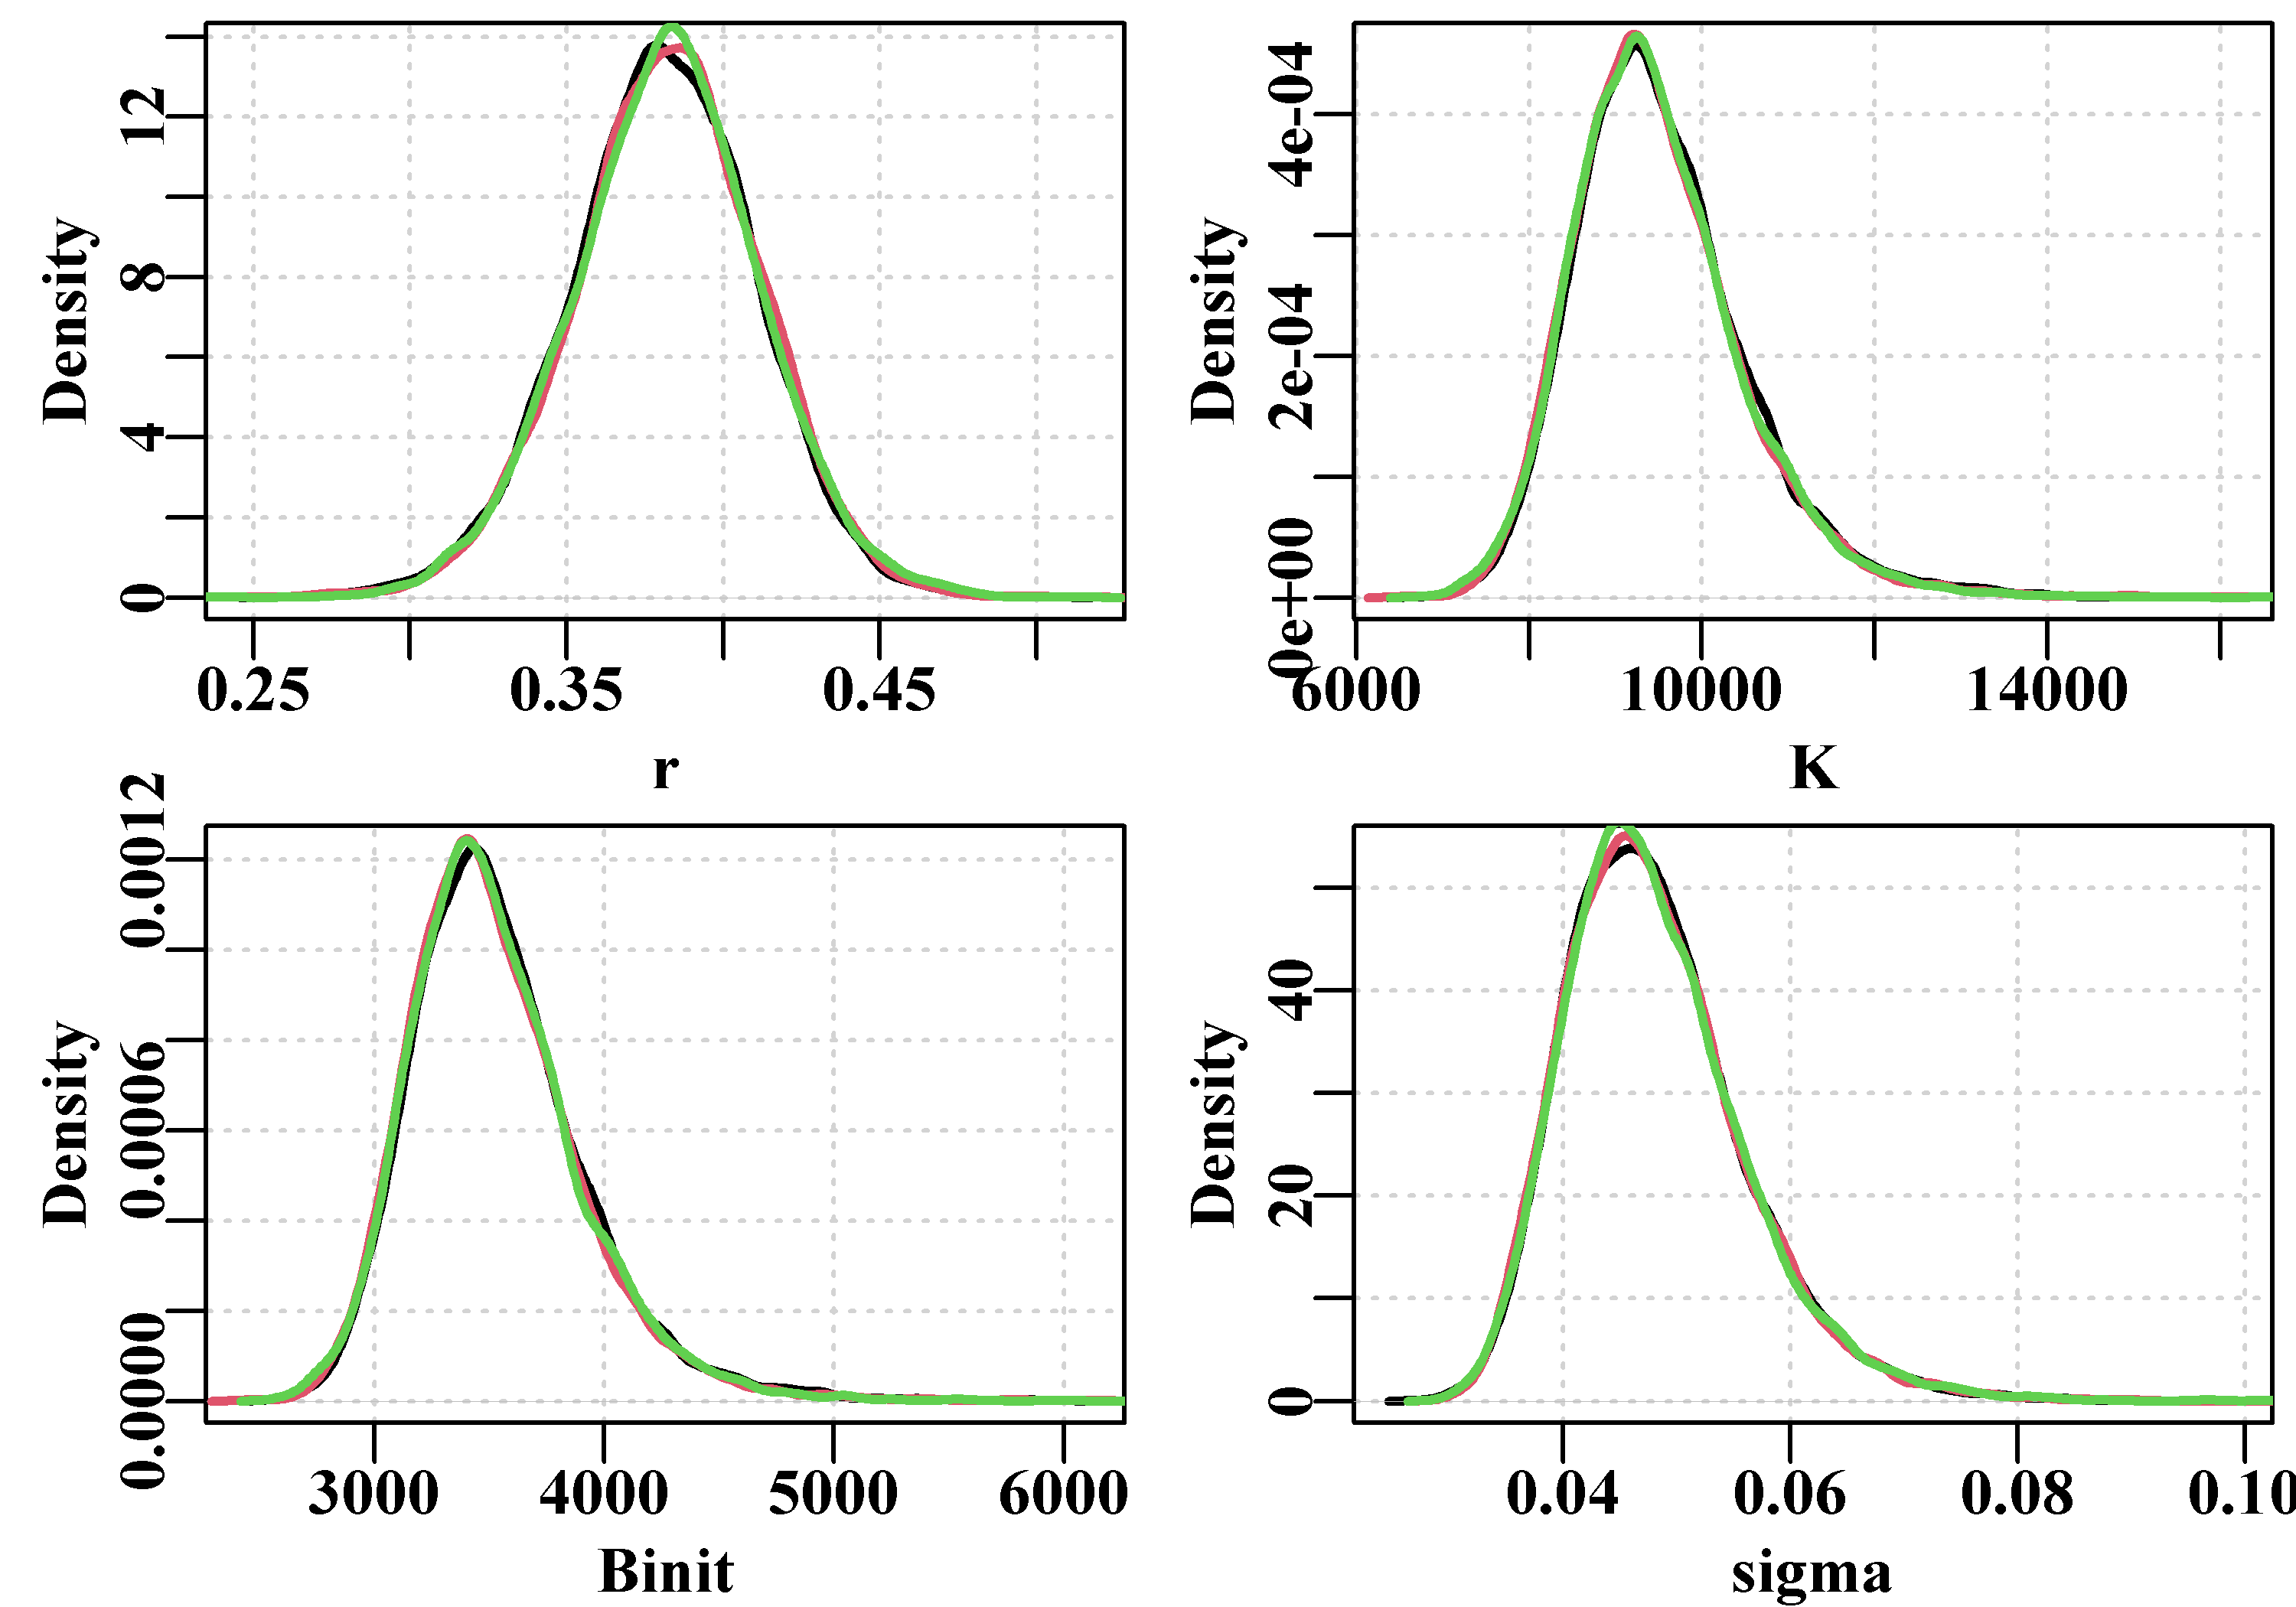 The variation between three chains in the marginal density distributions for the four Schaefer parameters using 10000 replicates at a thinning rate of 64 (4x64=256), and the simpspmC function. Slight differences are apparent where the line is wider than average.